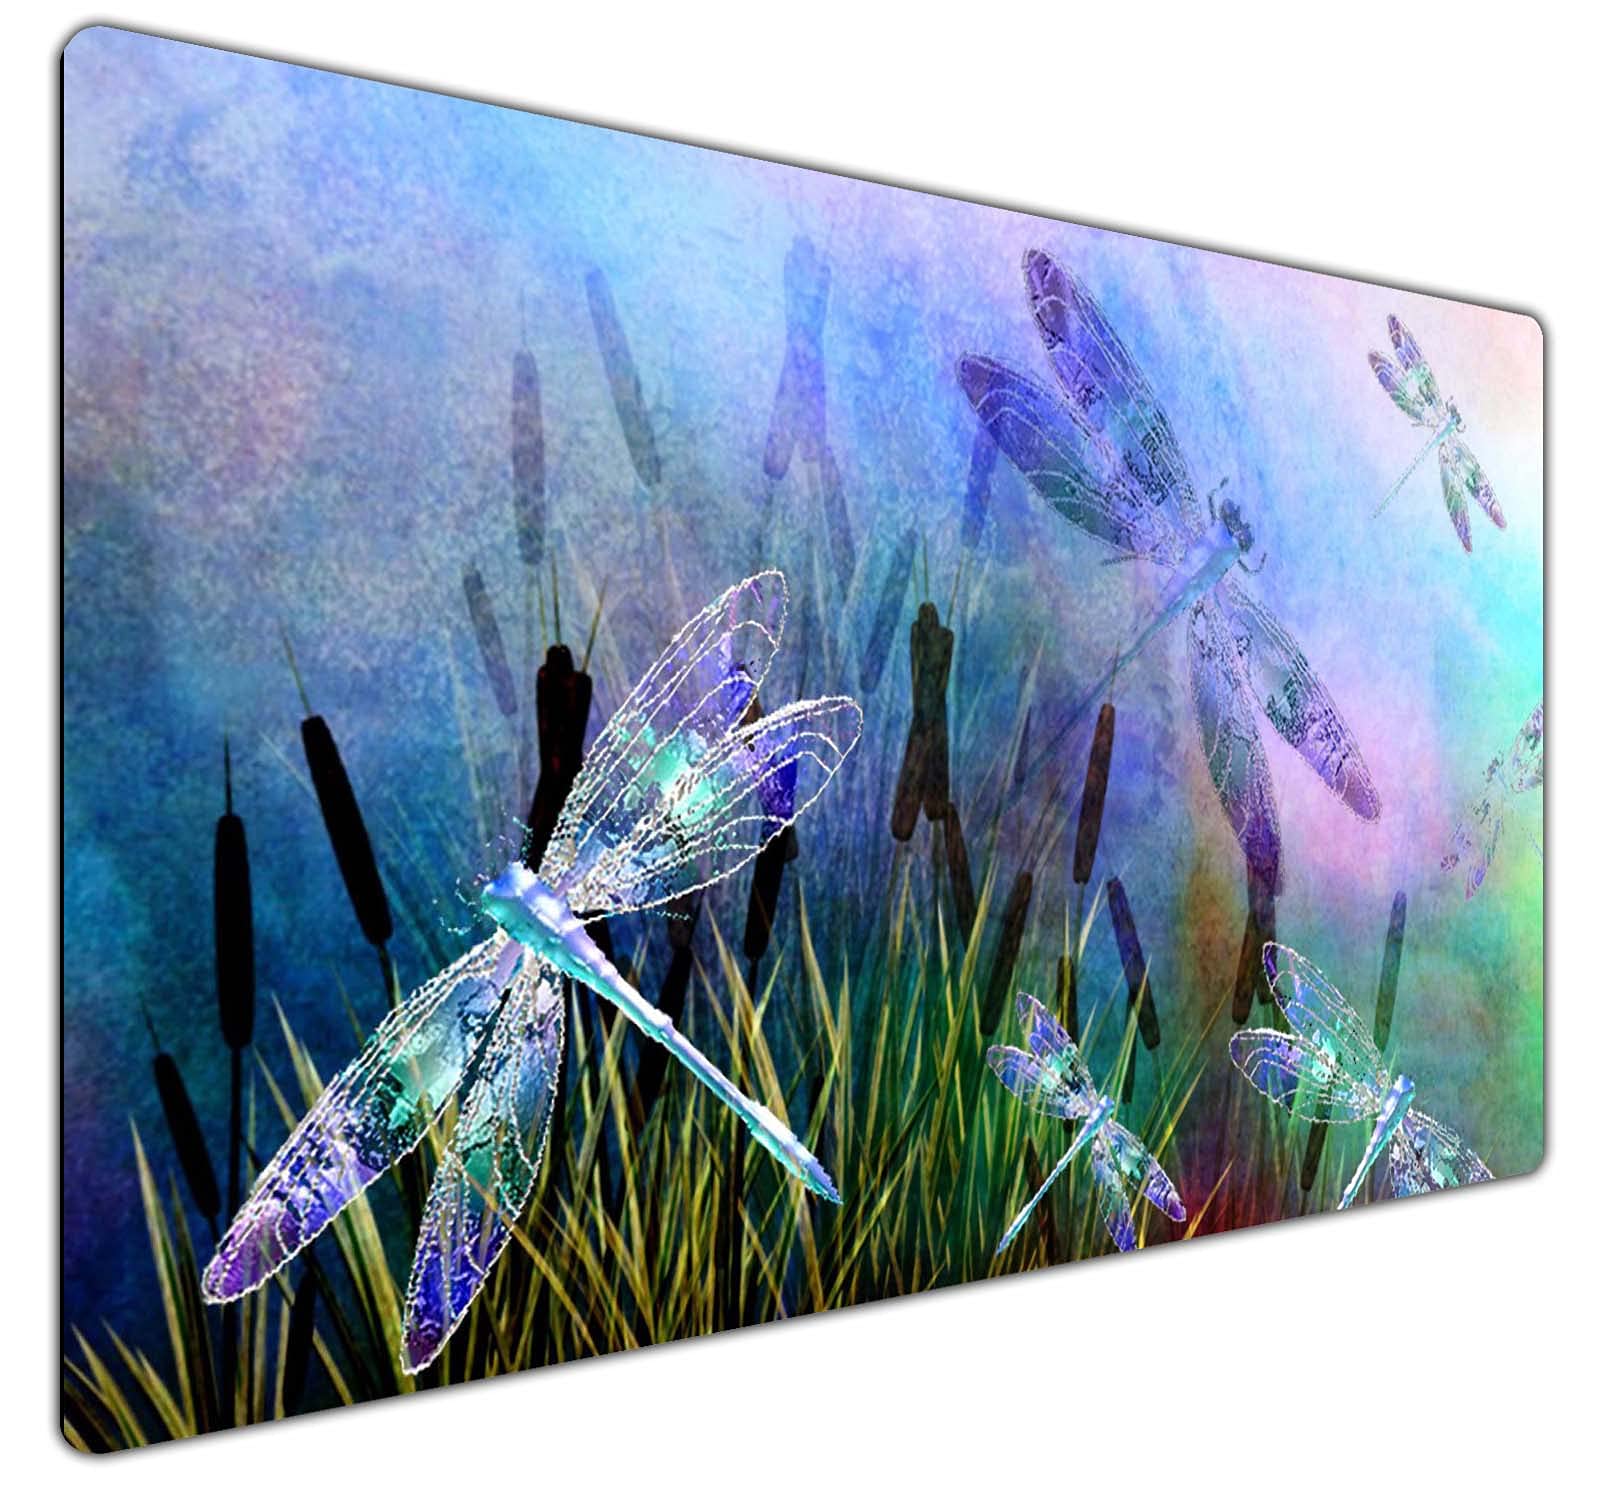 Large Mouse Pad,Non-Slip Rubber Mousepad,Professional Customized Gaming Mouse Mat,Waterproof Keyboard Desk Mat for Game,Work,Office,Home Decor Computer Accessories Purple Dragonfly